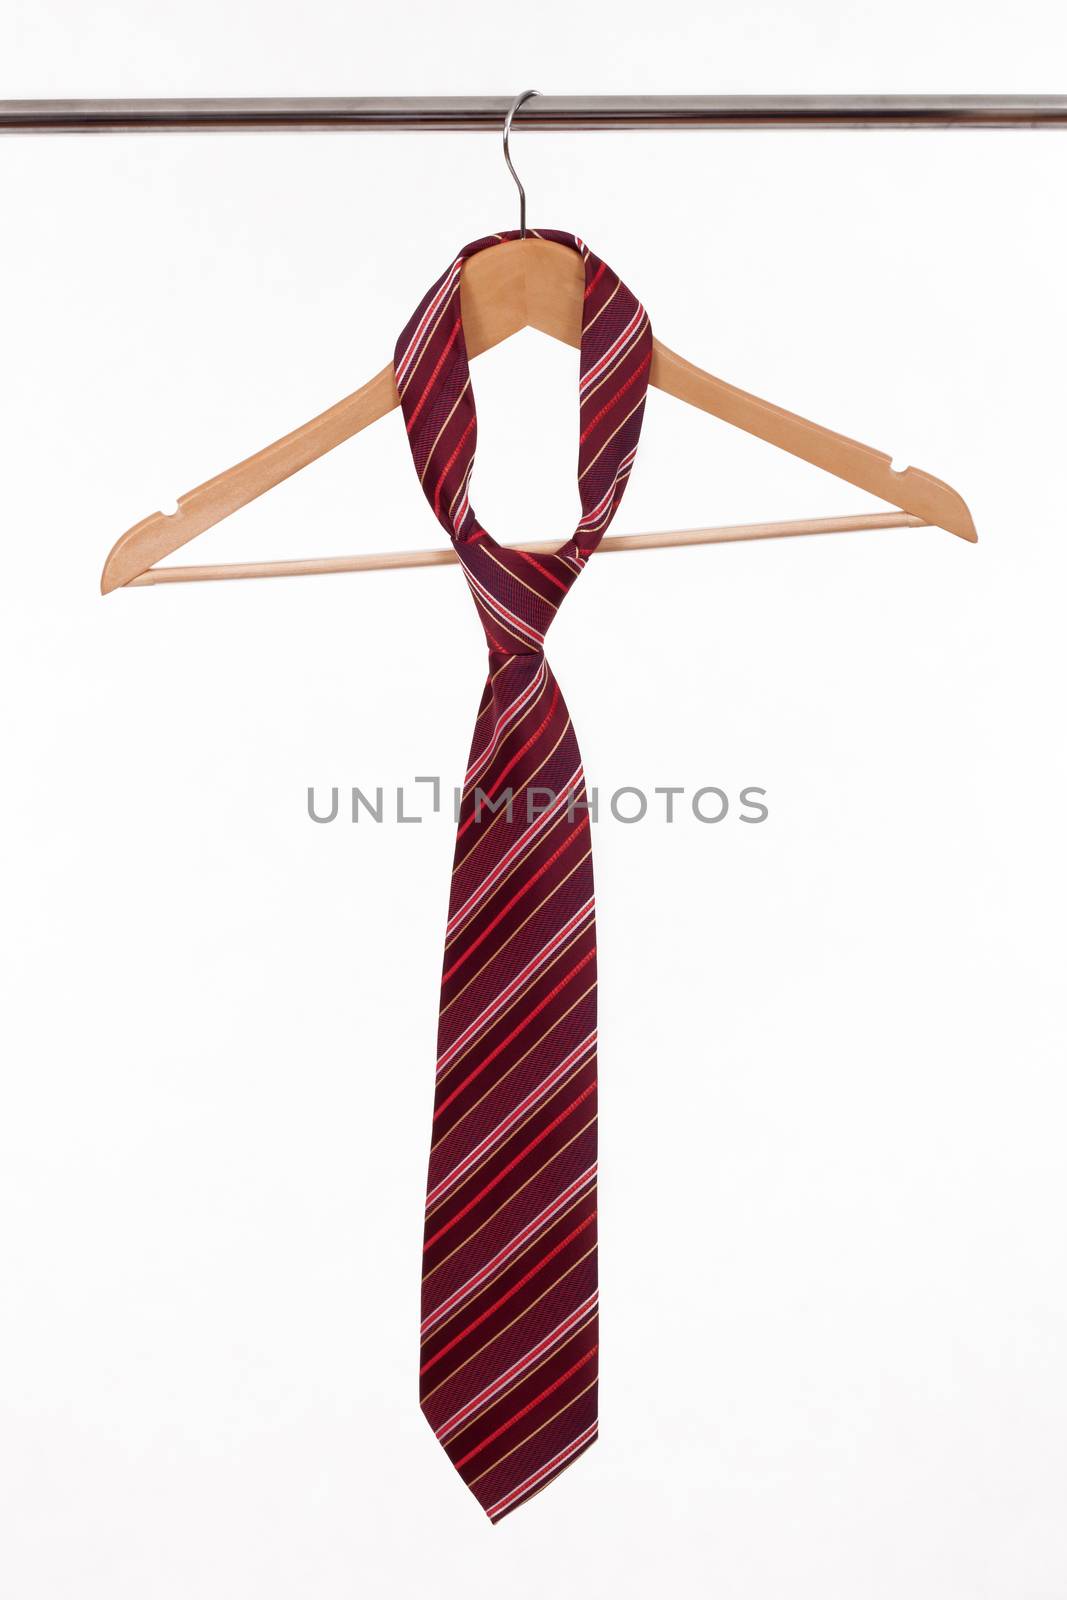 Hanger for clothes with tie isolated on white